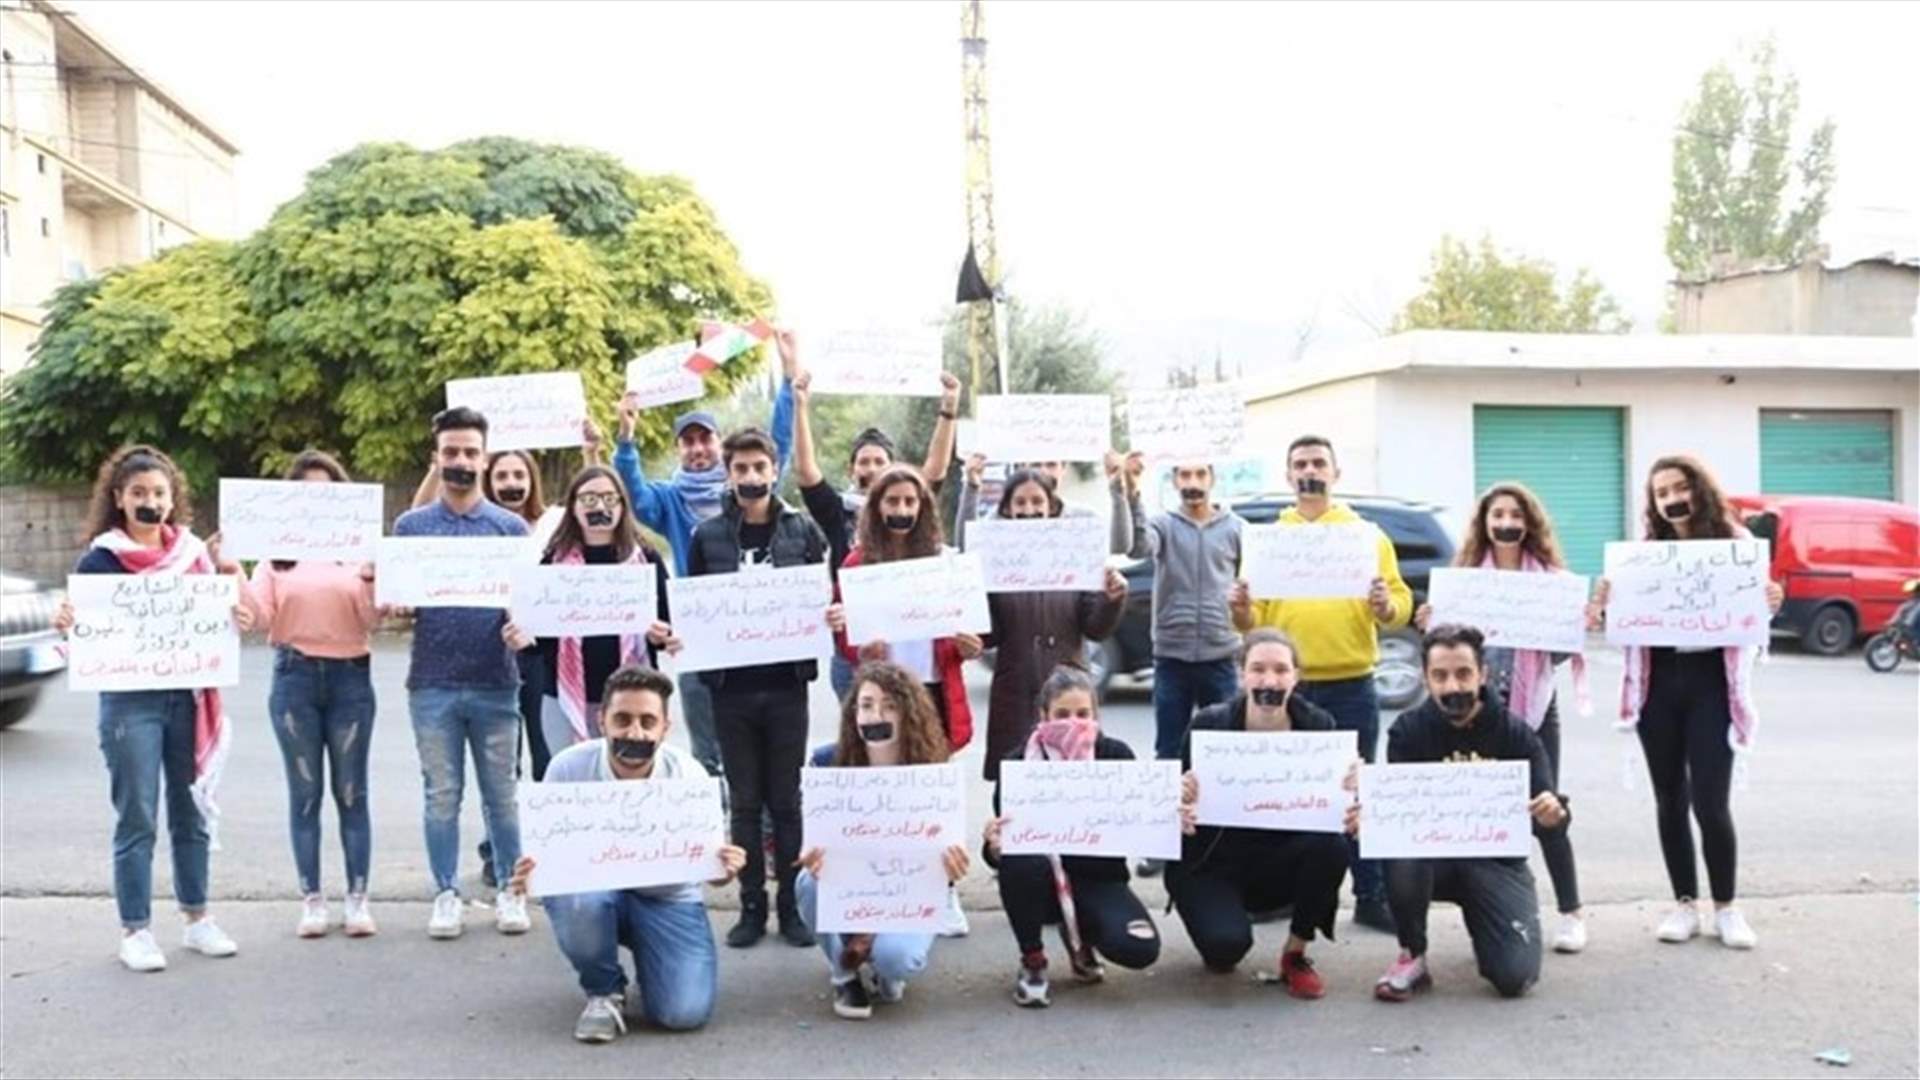 Silent sit-in in Labweh against “media blackout” on protests-[PHOTOS]